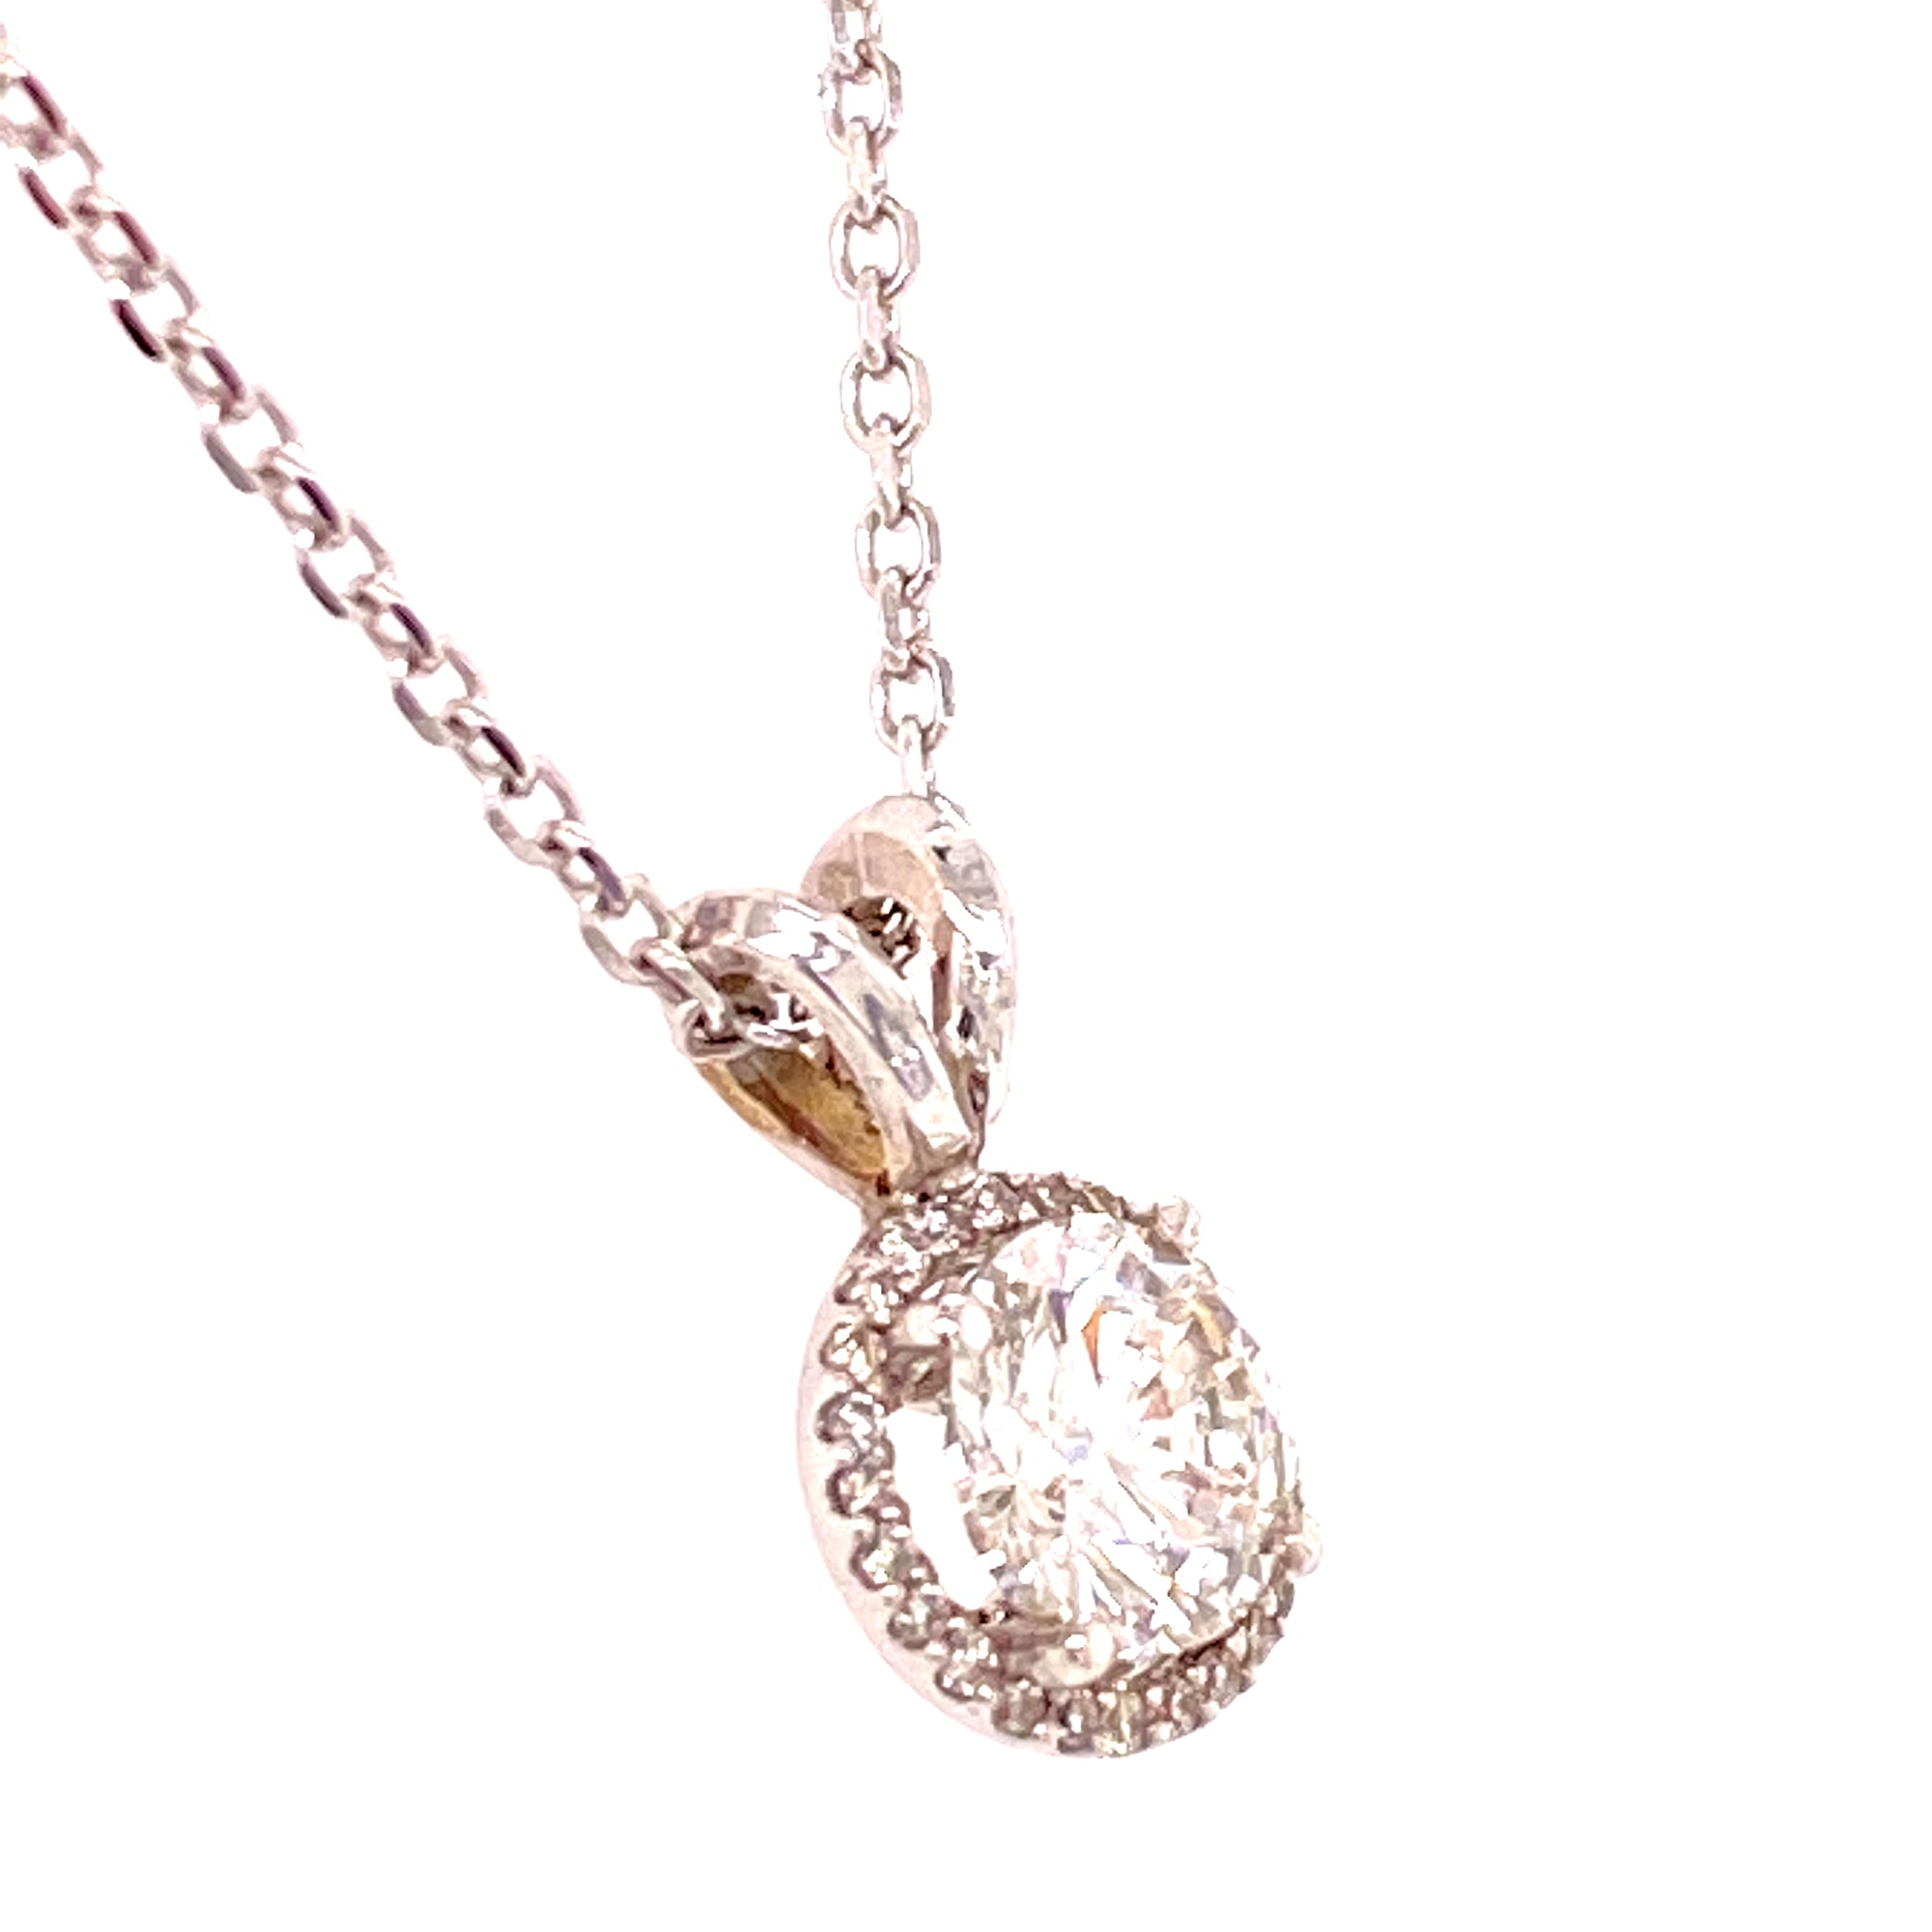 Buy 14k Gold Diamond Necklace / 3.3mm Rose Gold Solitaire Diamond Necklace  / Bezel Set Necklace / Diamond Prong Necklace / Bridal Gifts for Her Online  in India - Etsy